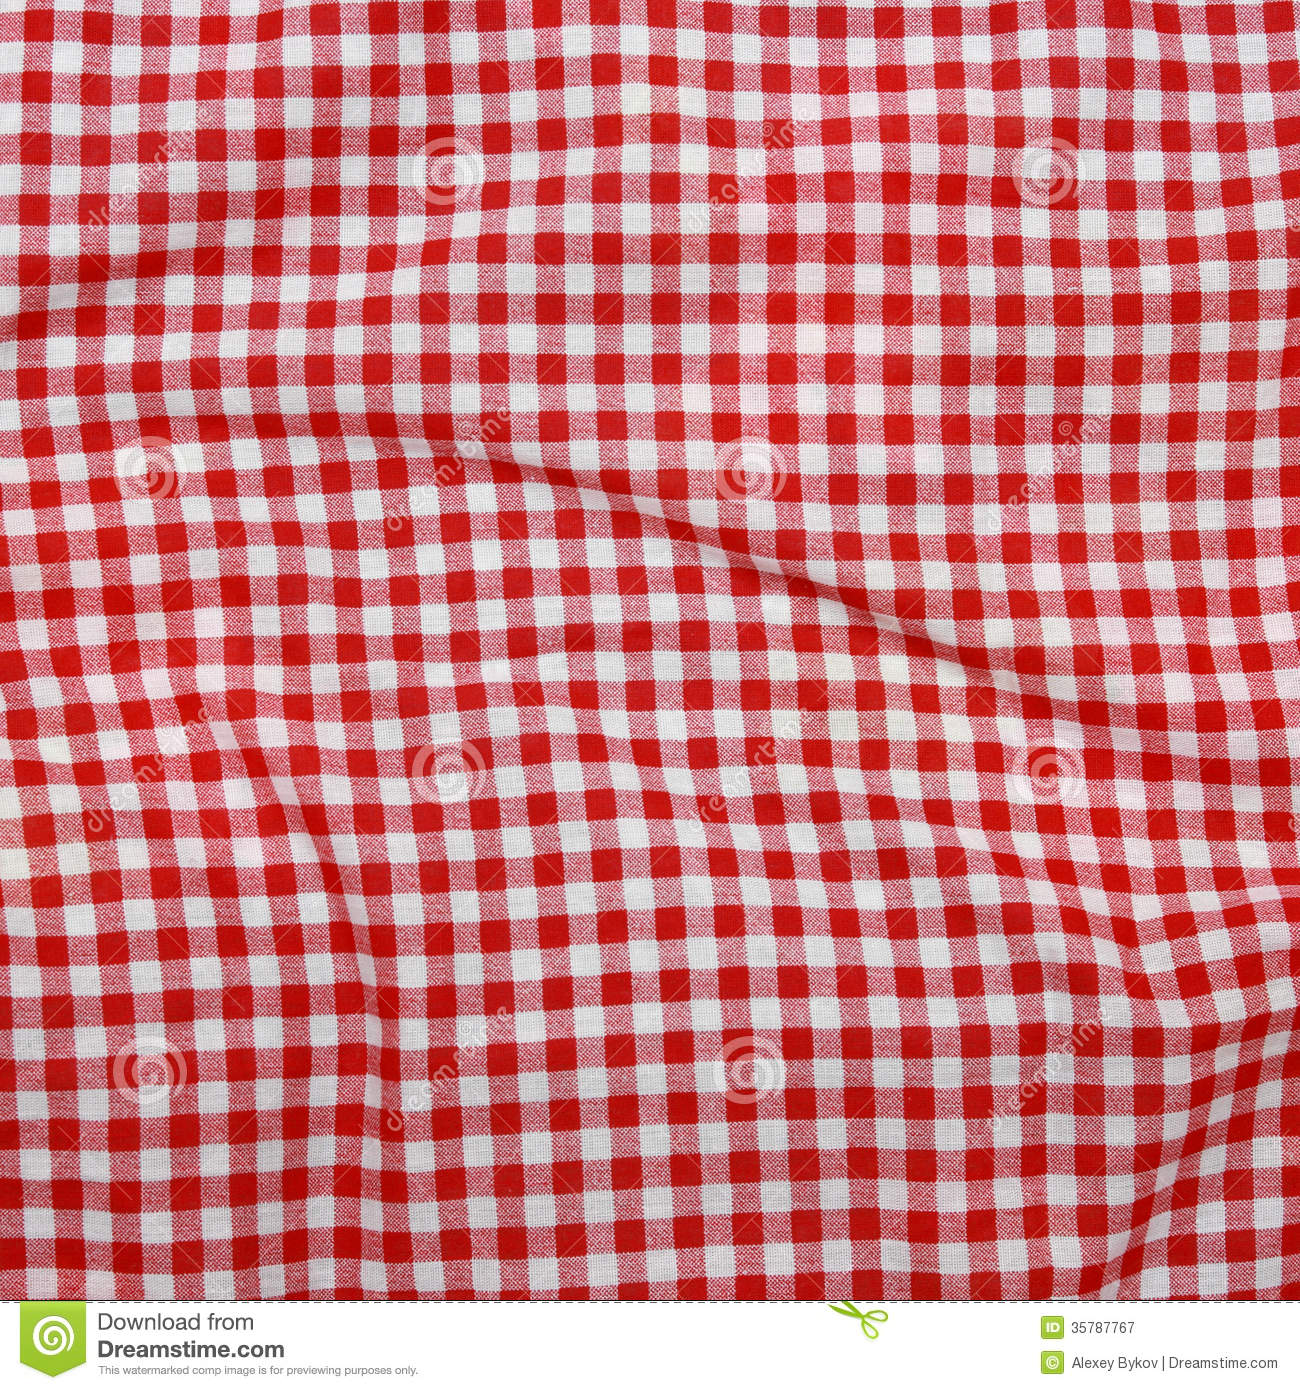 Red Linen Crumpled Tablecloth  Royalty Free Stock Photography   Image